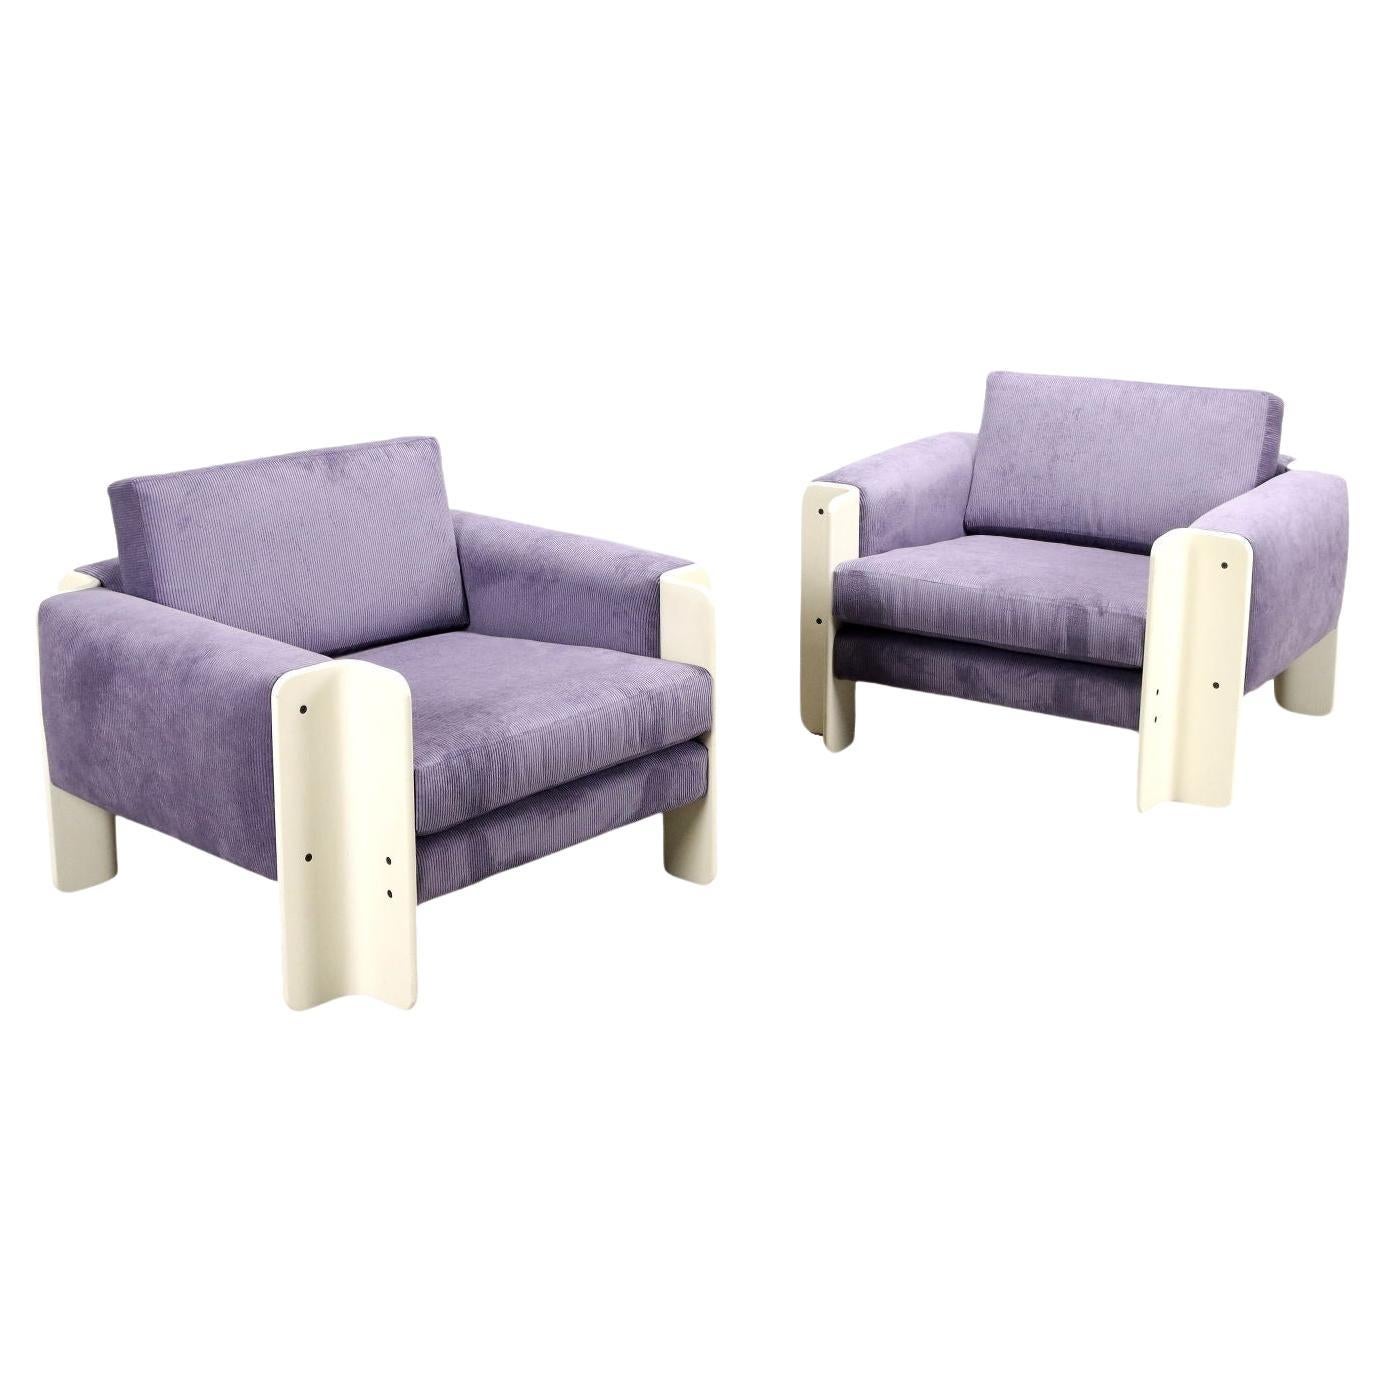 Pair of 1970s armchairs in lilac velvet and white lacquered wood For Sale